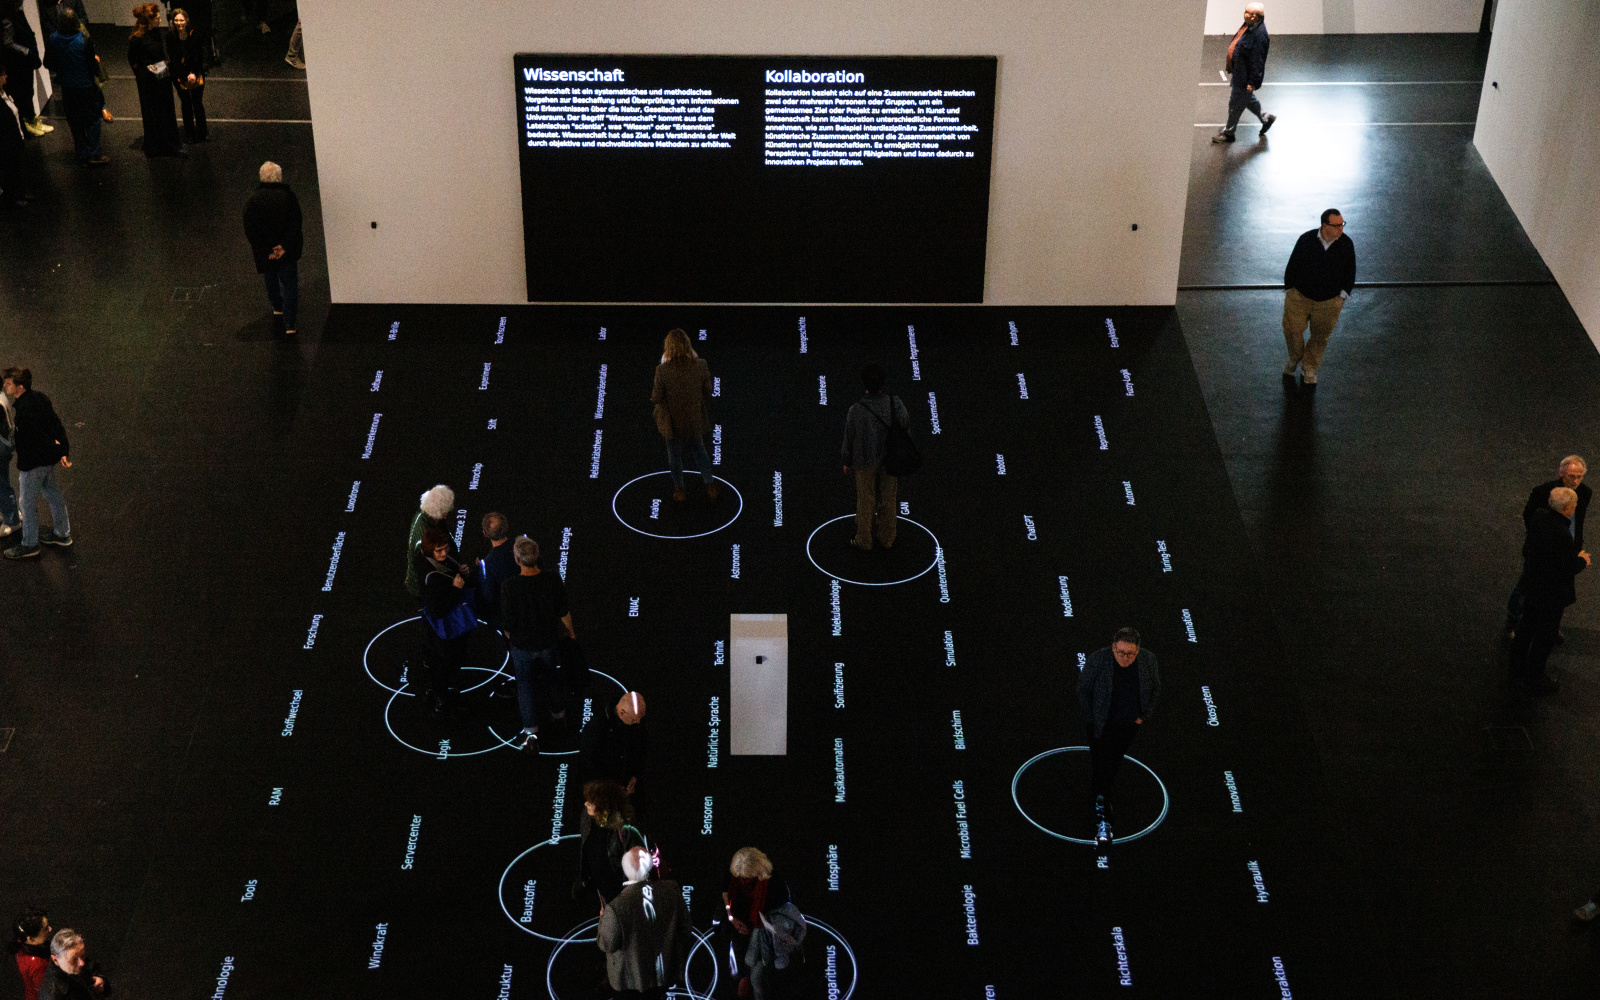 You can see several people on a black surface. On this surface there are words. Around the people are white circles. In the background are two screens.